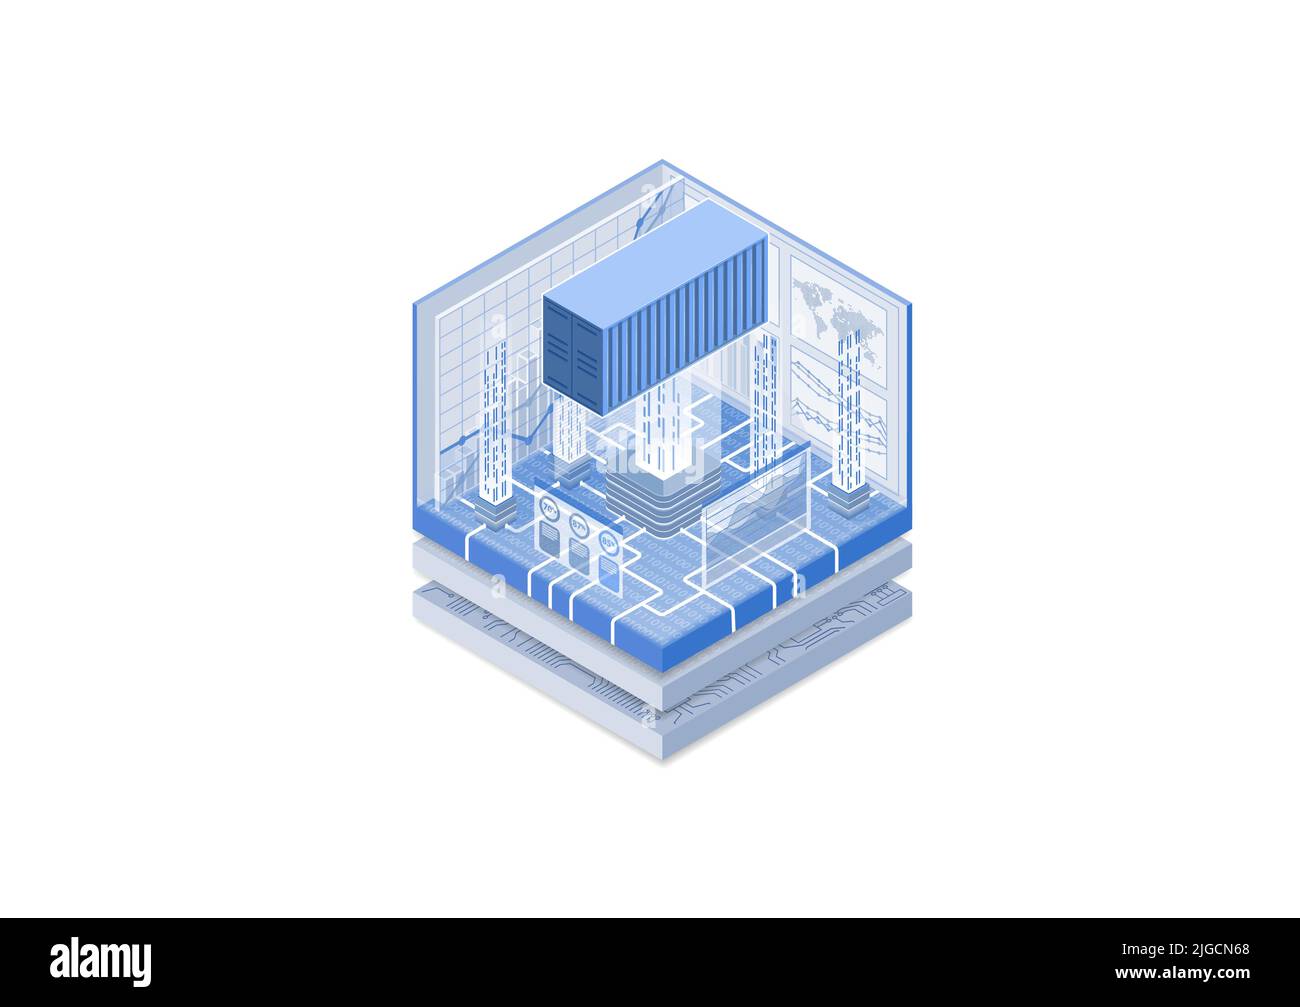 Global supply chain concept. Vector illustration of an isometric cube. Symbol of a shipping container connected to the internet via digitization. Stock Vector